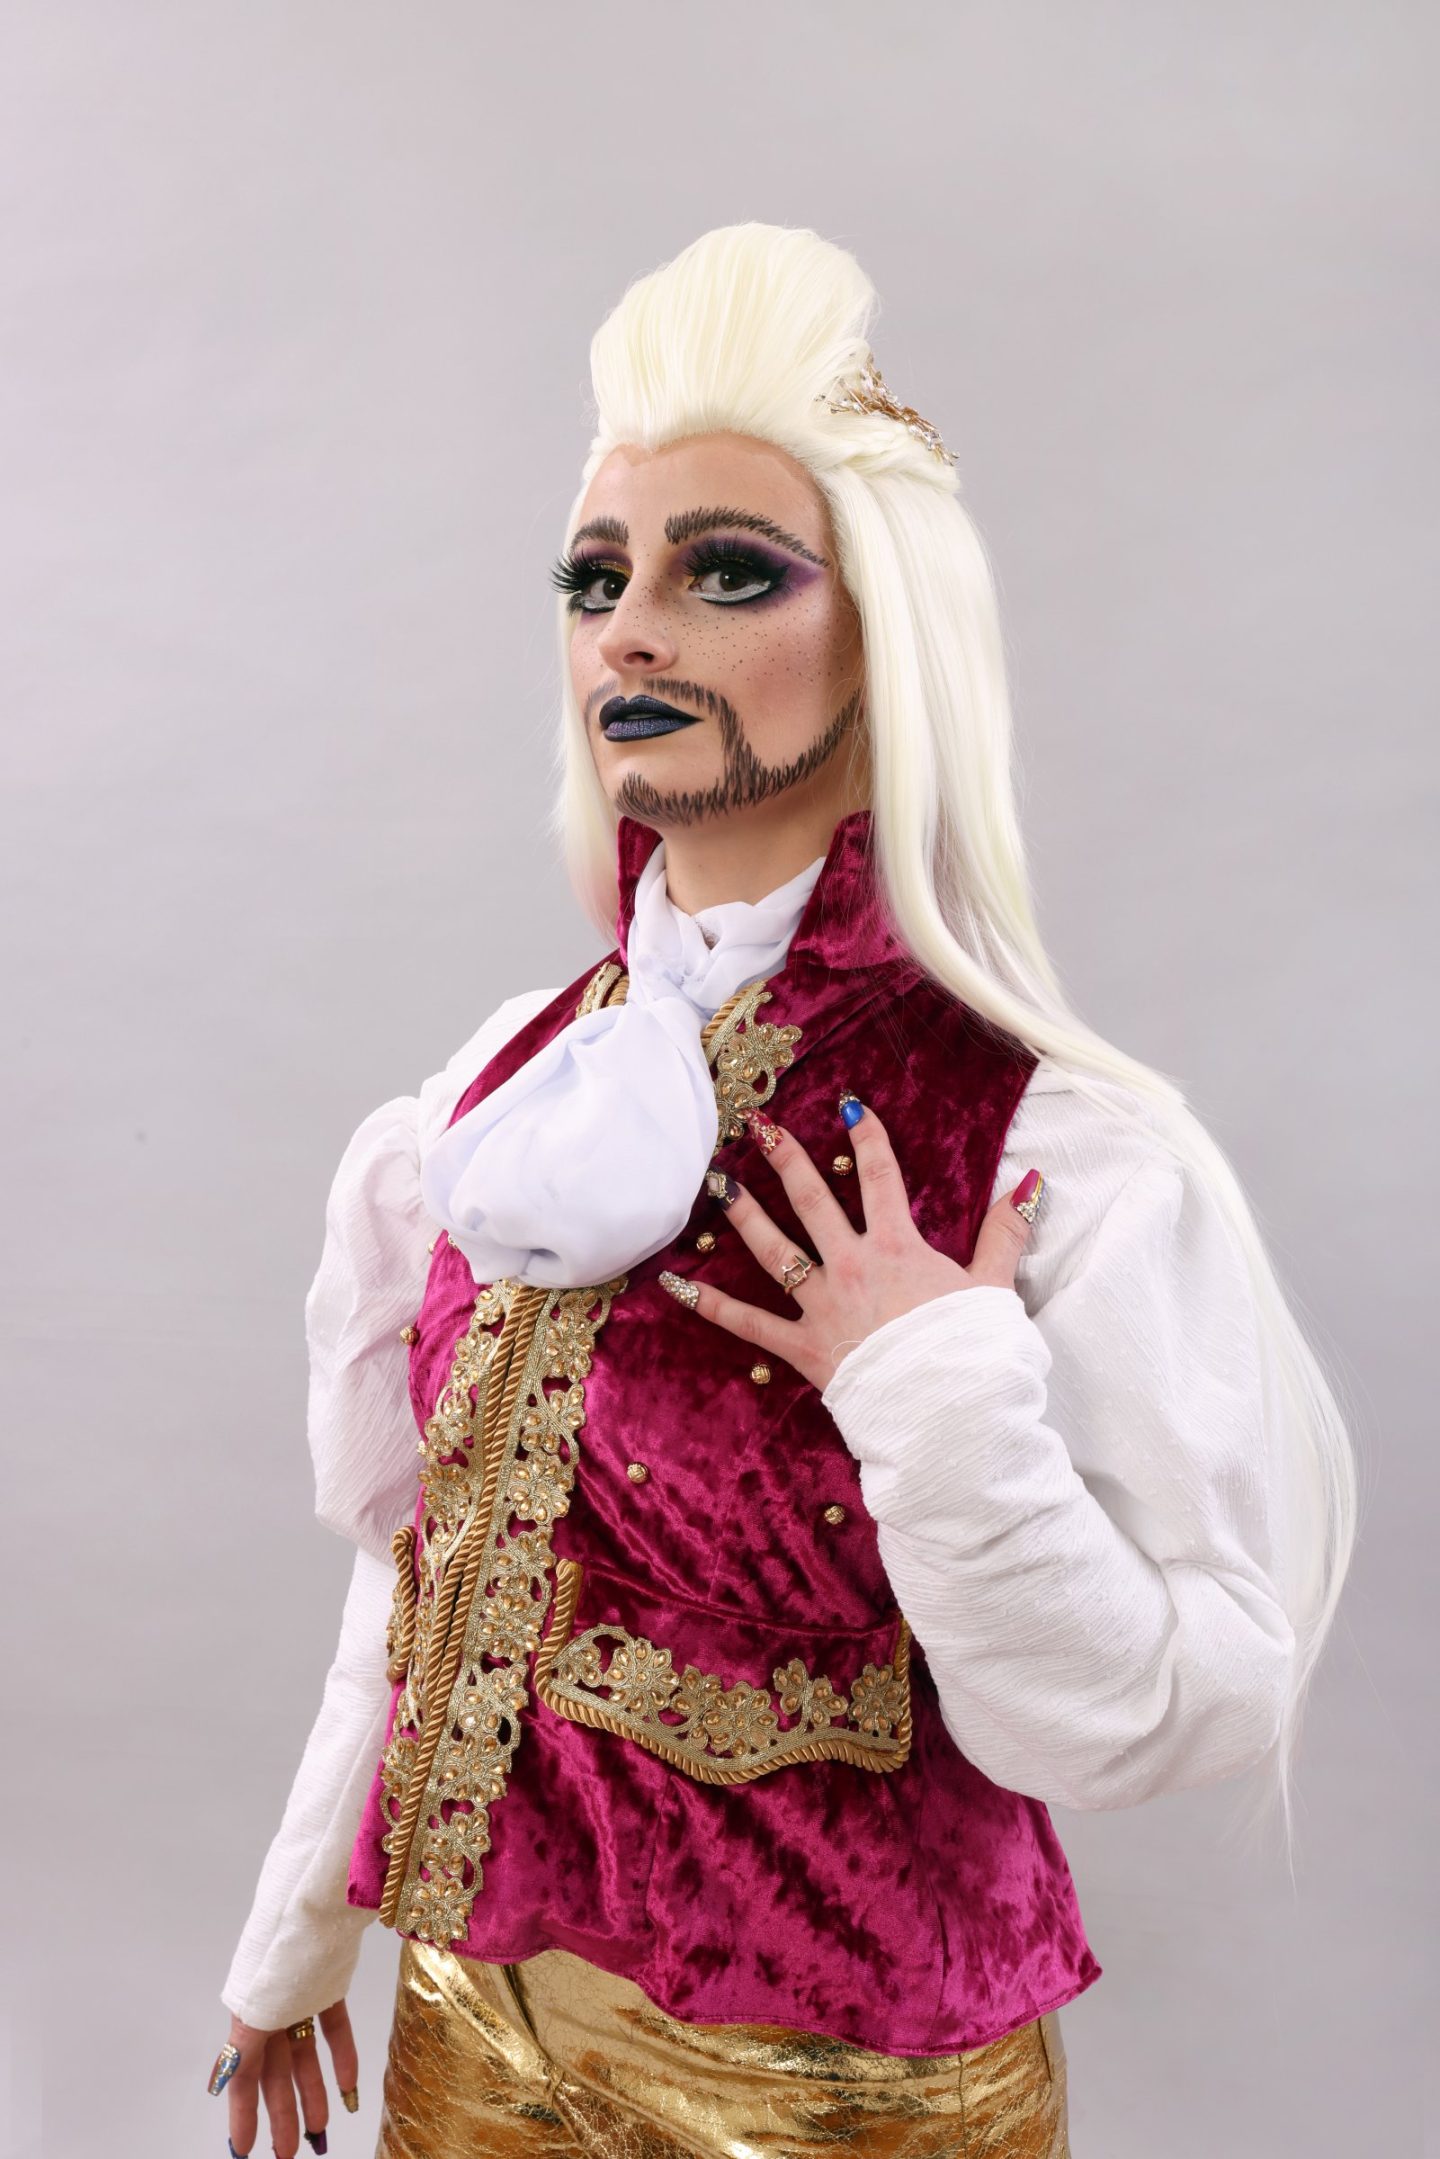 Dare De LaFemme wearing his magenta and gold embellished waistcoat, with white shirt and cravatte. He looks off camera with captivating expression.